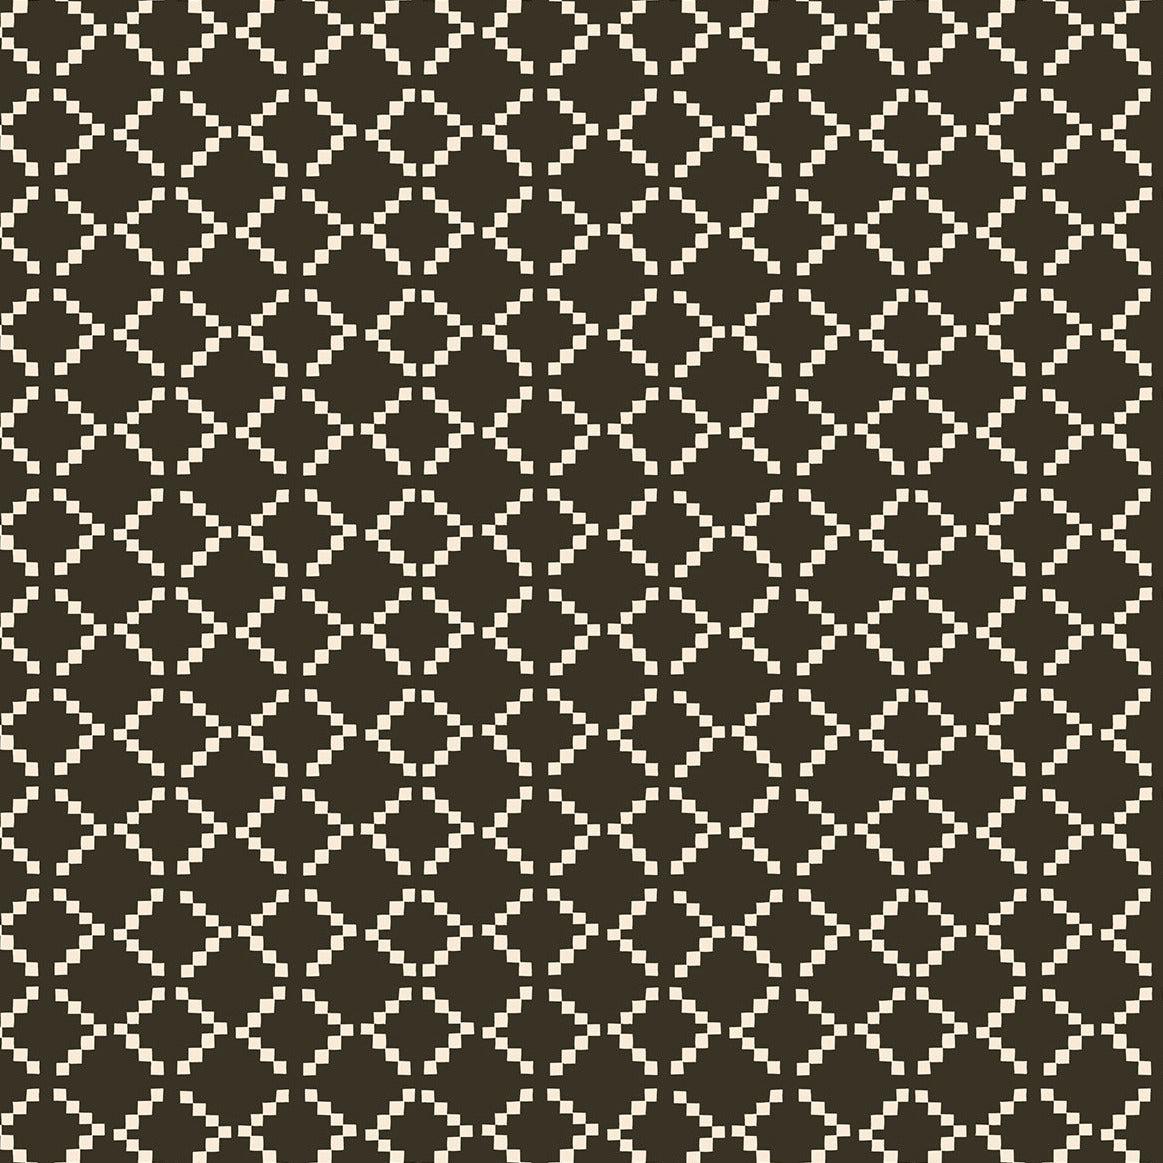 Ruby Star Society-Tiny Tiles Soft Black-fabric-gather here online